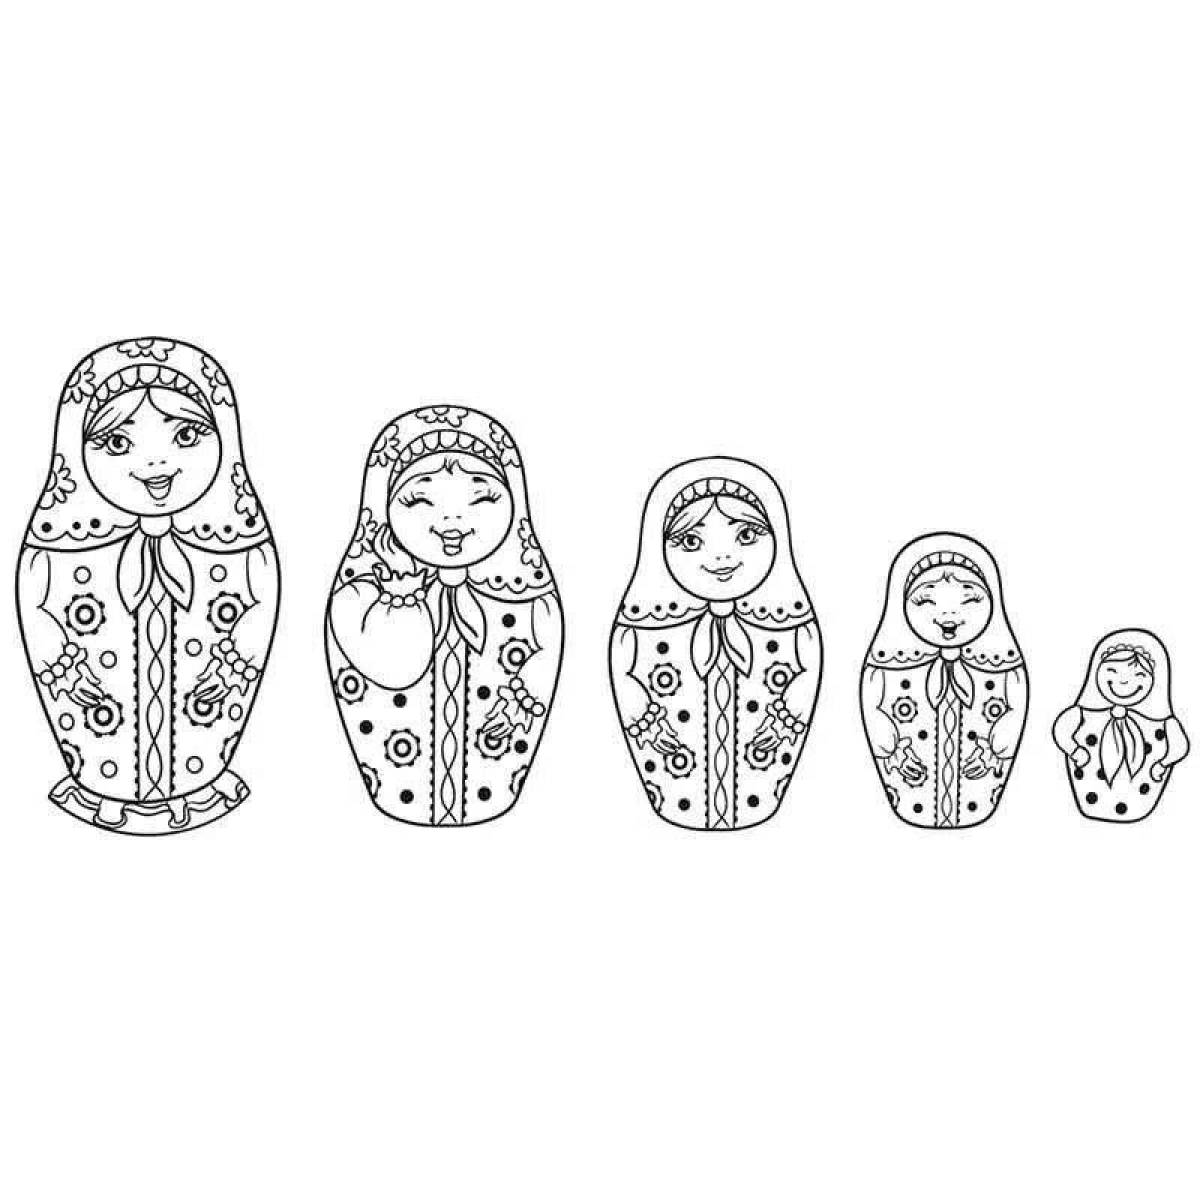 Funny pictures with nesting dolls